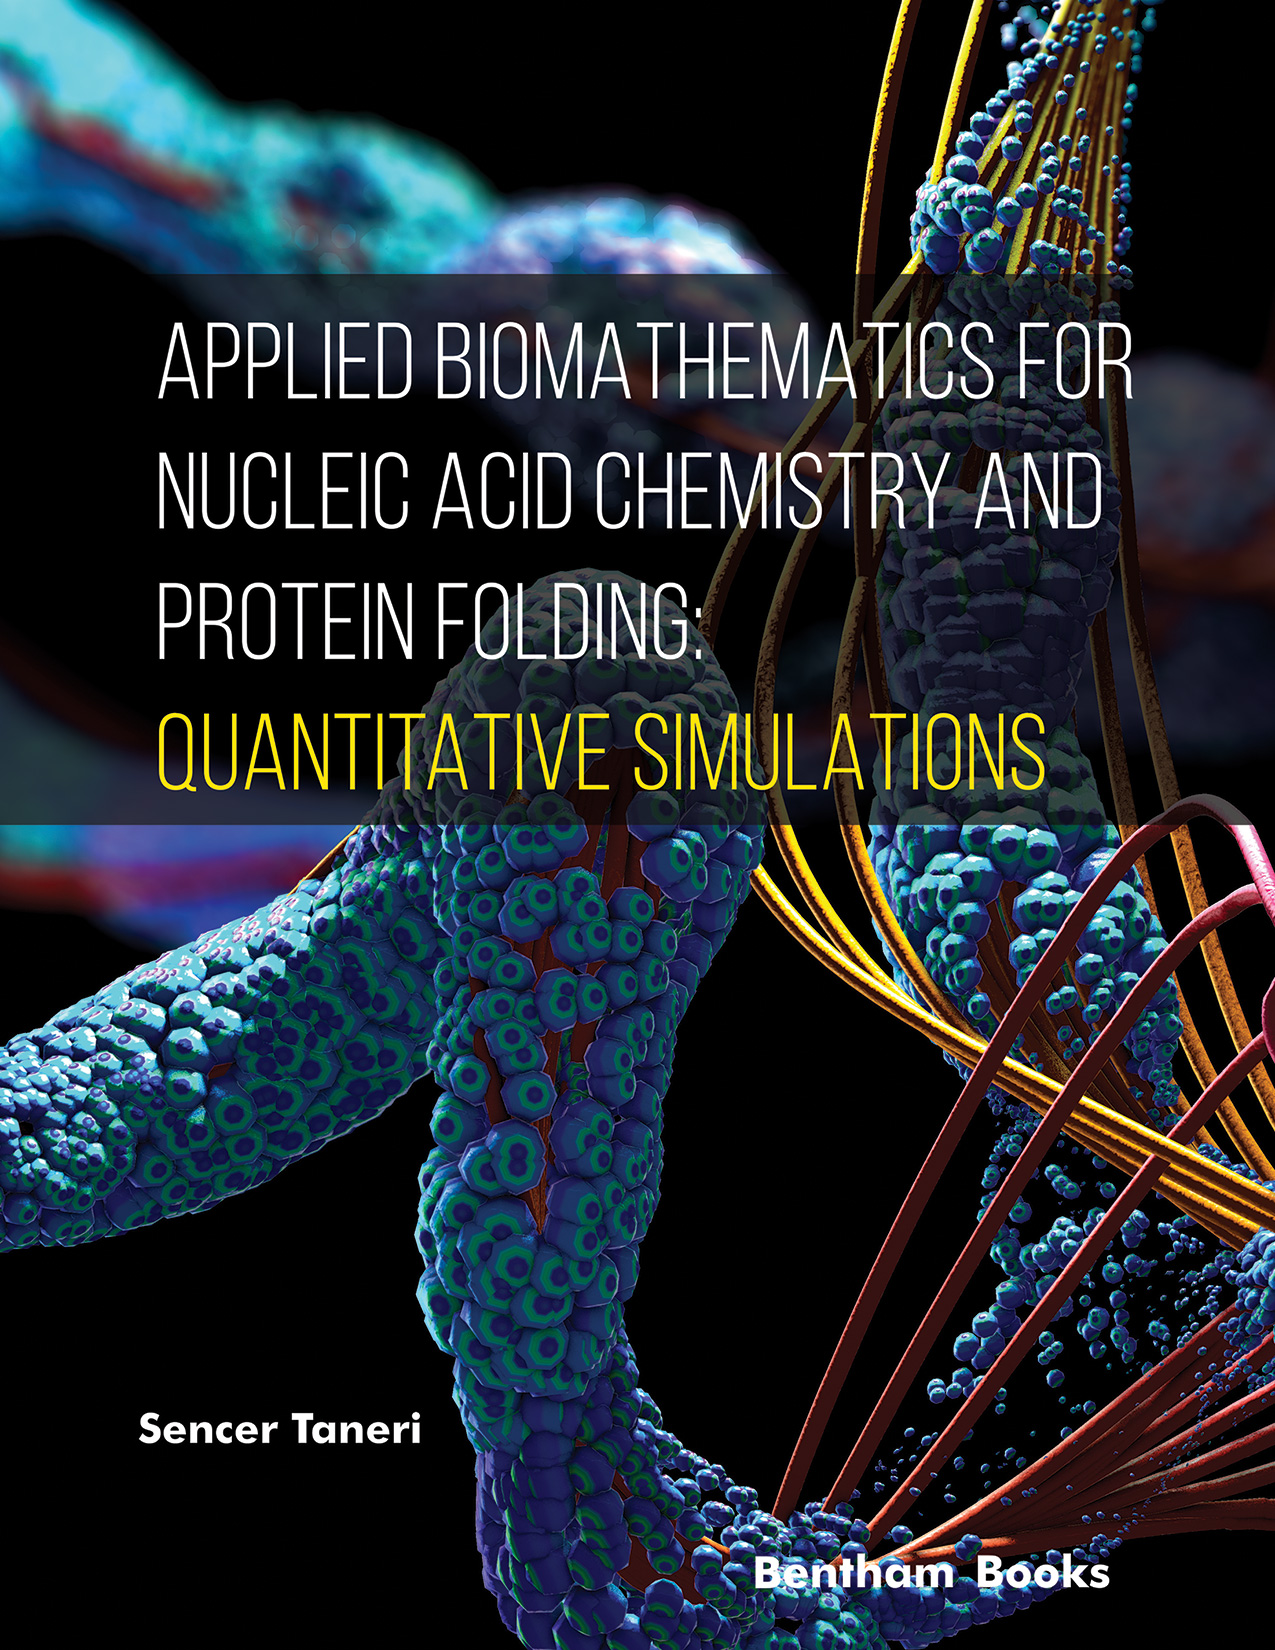 Applied Biomathematics for Nucleic Acid Chemistry and Protein Folding: Quantitative Simulations